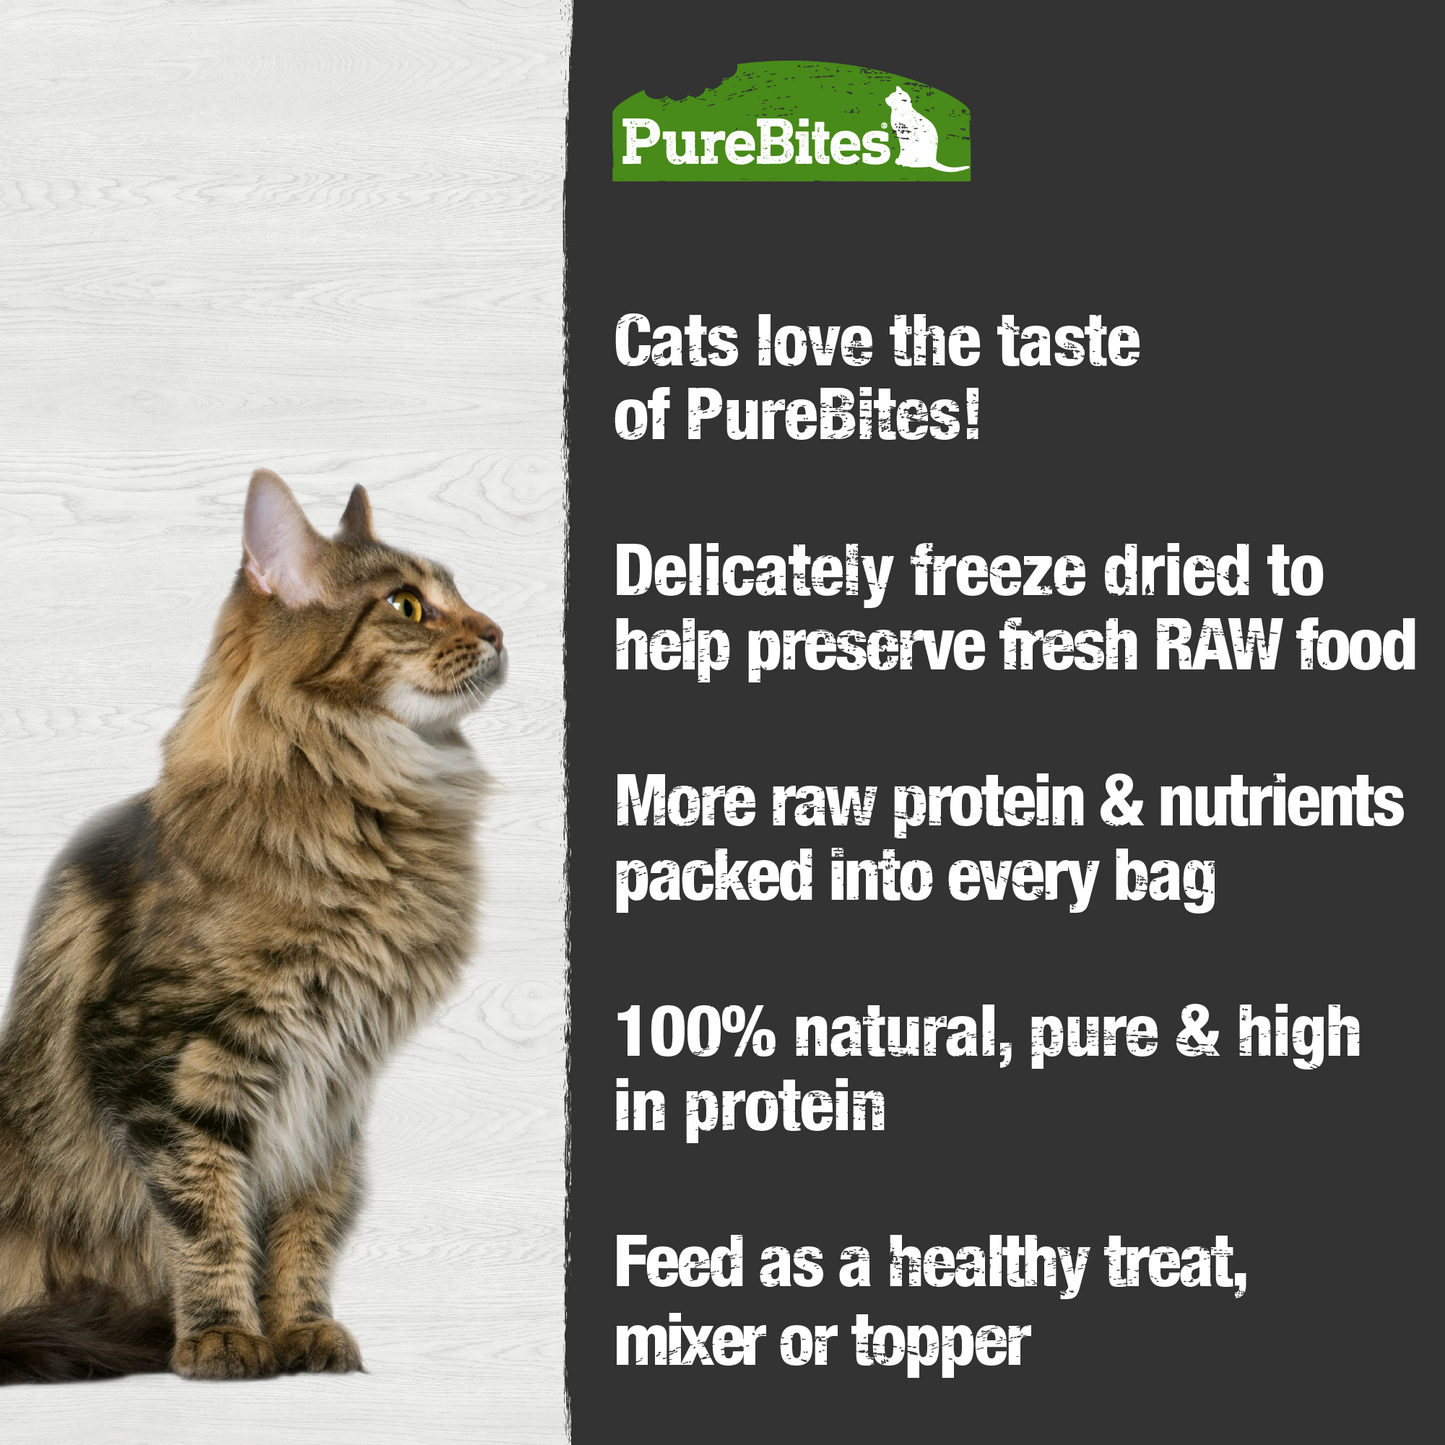 Made fresh & pure means more RAW protein and nutrients packed into every bag. Our chicken & catnip is freeze dried to help preserve its RAW taste, and nutrition, and mirror a cat’s ancestral diet